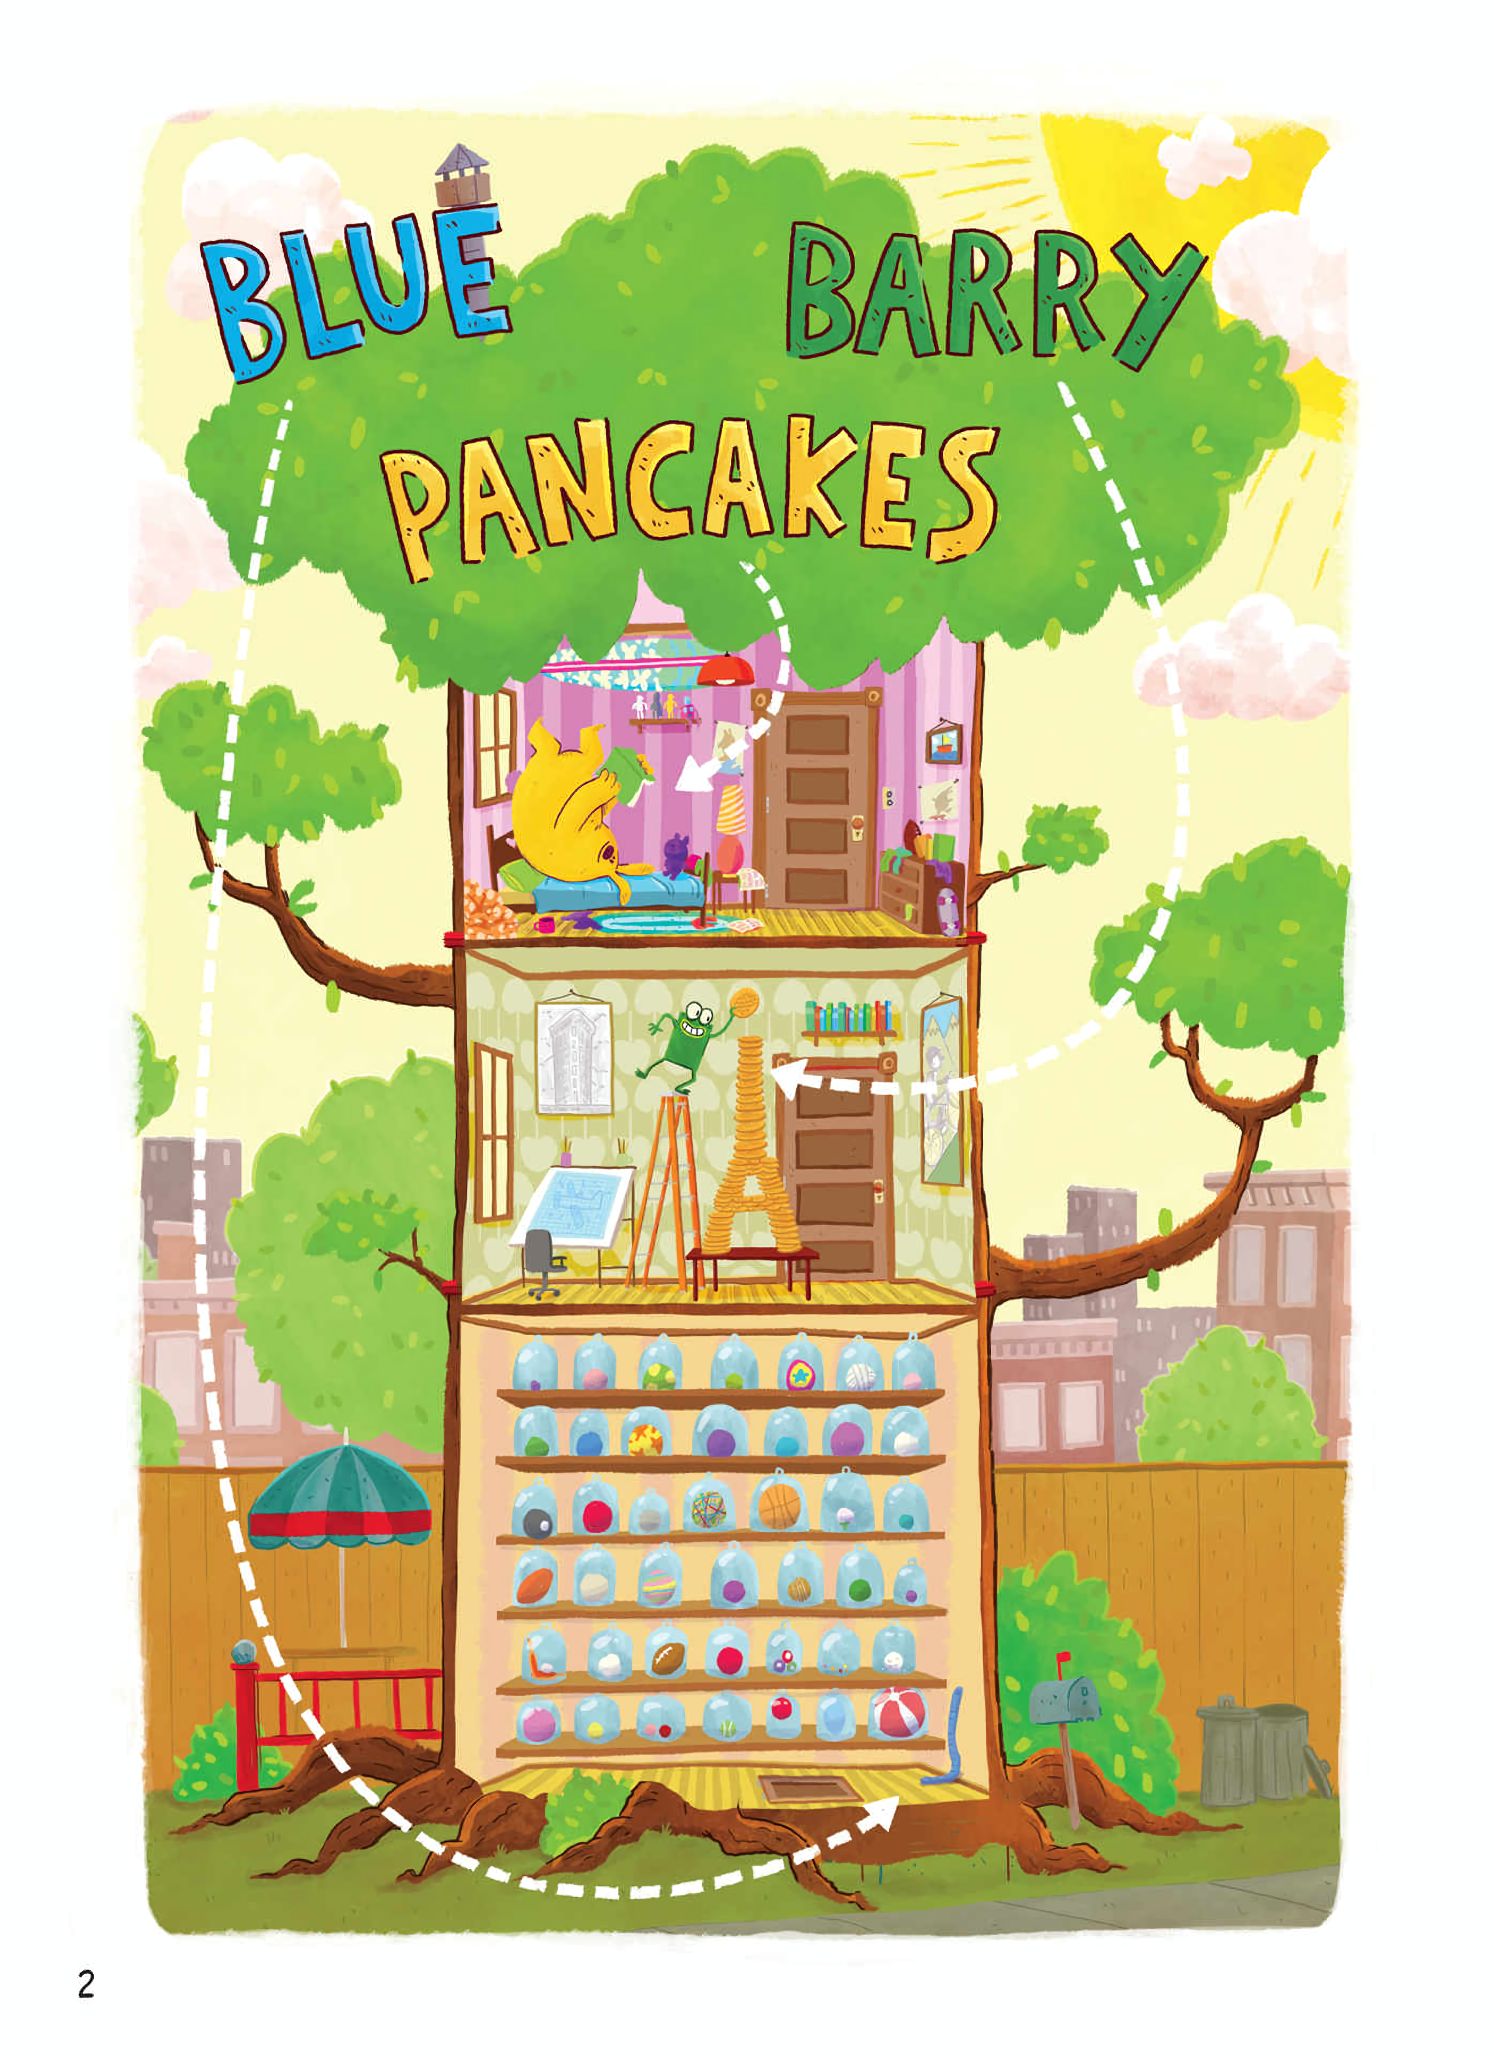 Read online Blue, Barry & Pancakes comic -  Issue # TPB 1 - 8